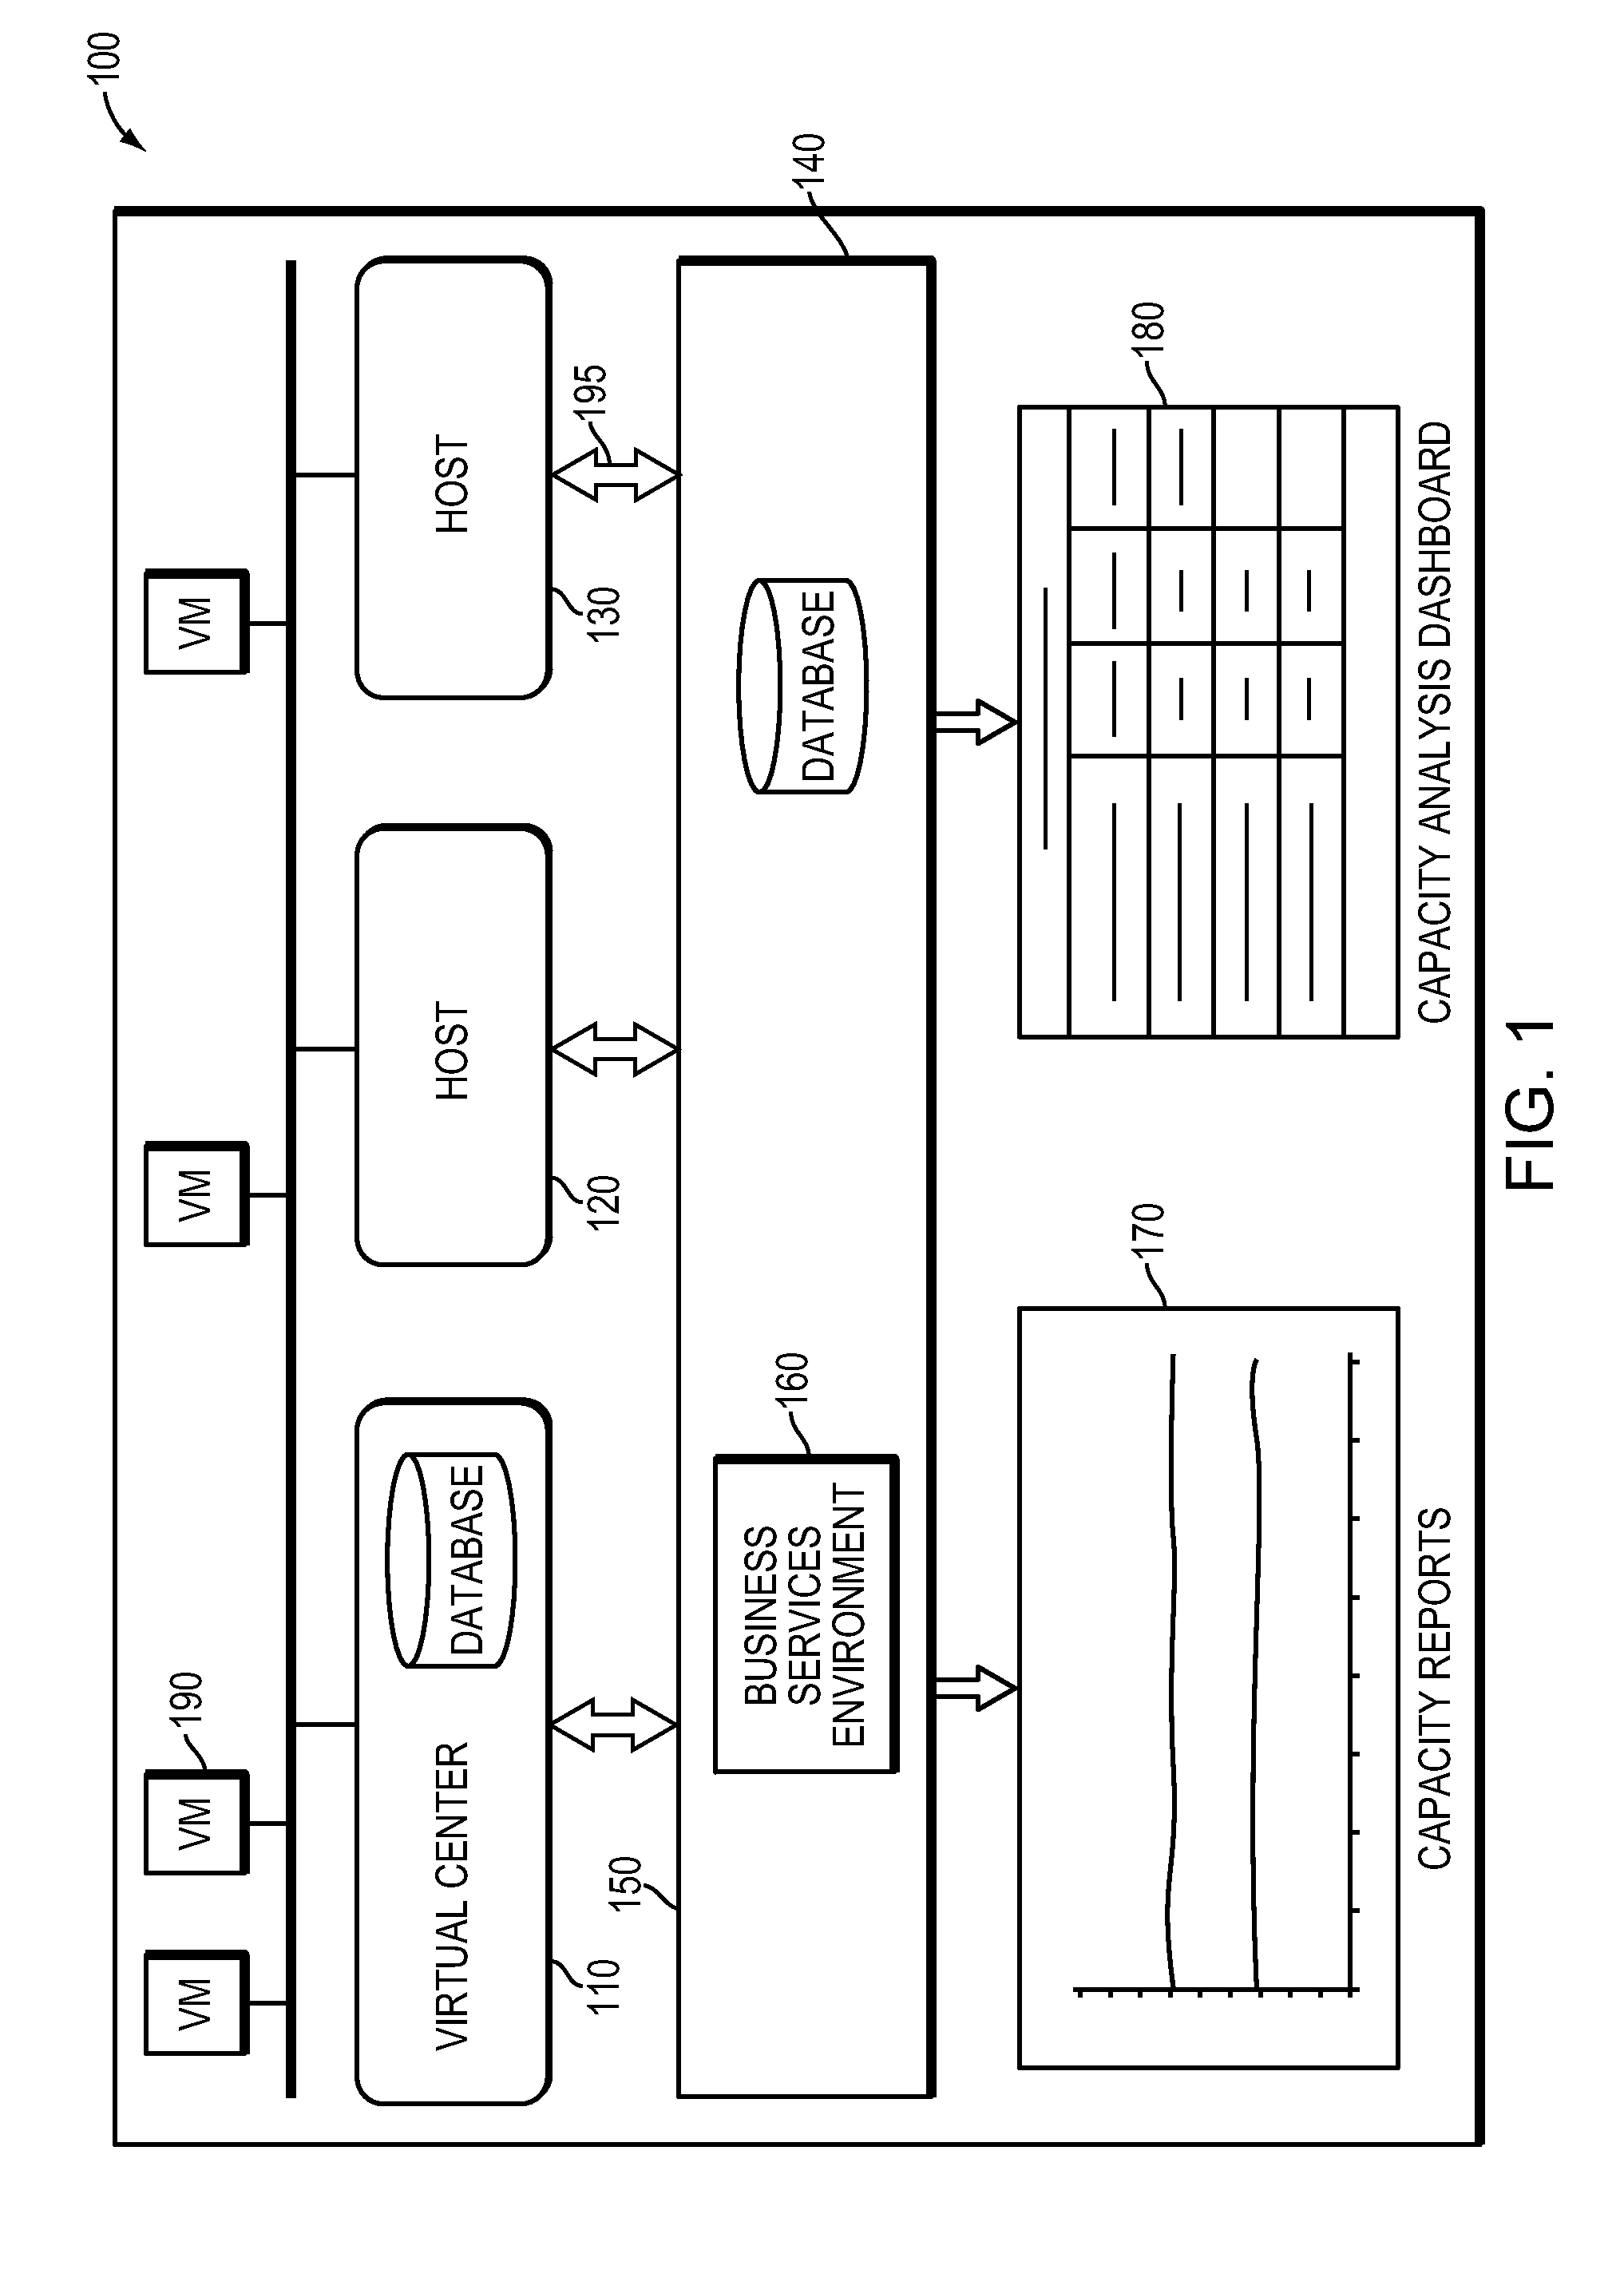 Method, system and apparatus for managing, modeling, predicting, allocating and utilizing resources and bottlenecks in a computer network